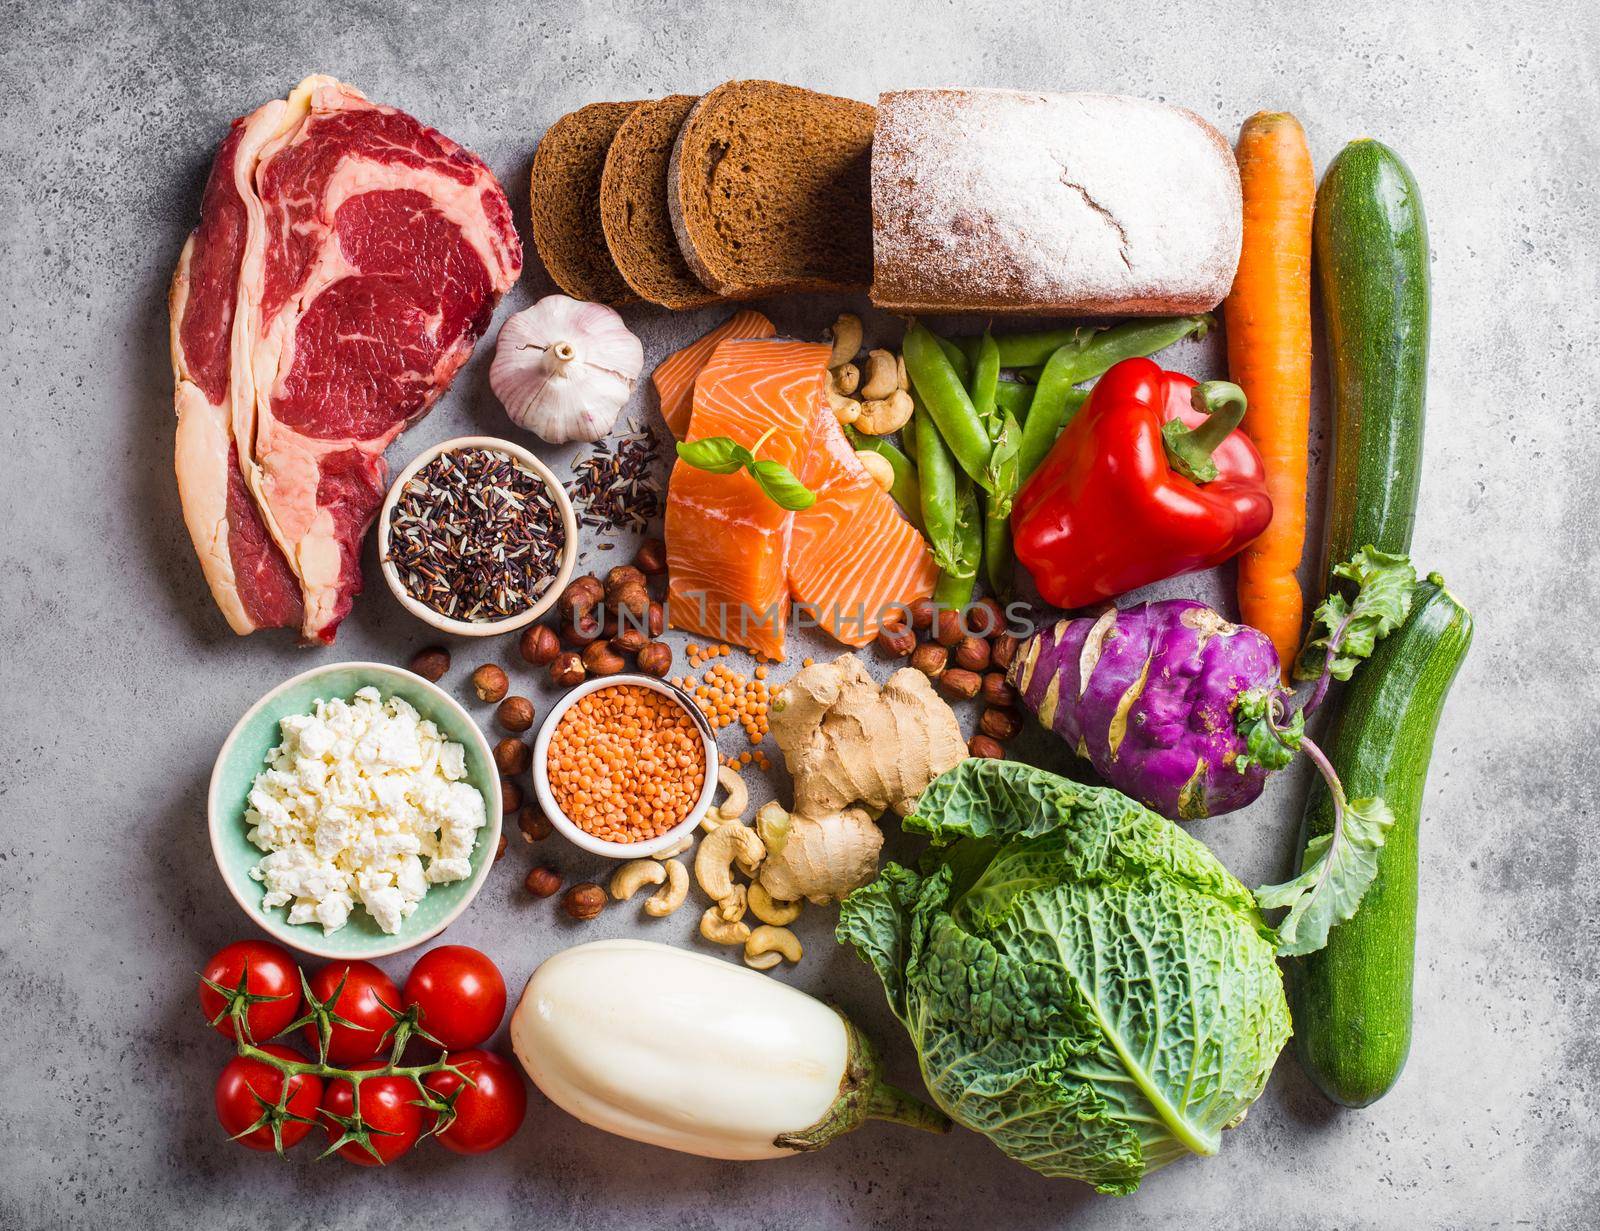 Assortment of healthy balanced food composition: meat, fish, vegetables, bread, cereals, beans, stone background. Raw ingredients for cooking healthy meal, good for diet, clean eating concept